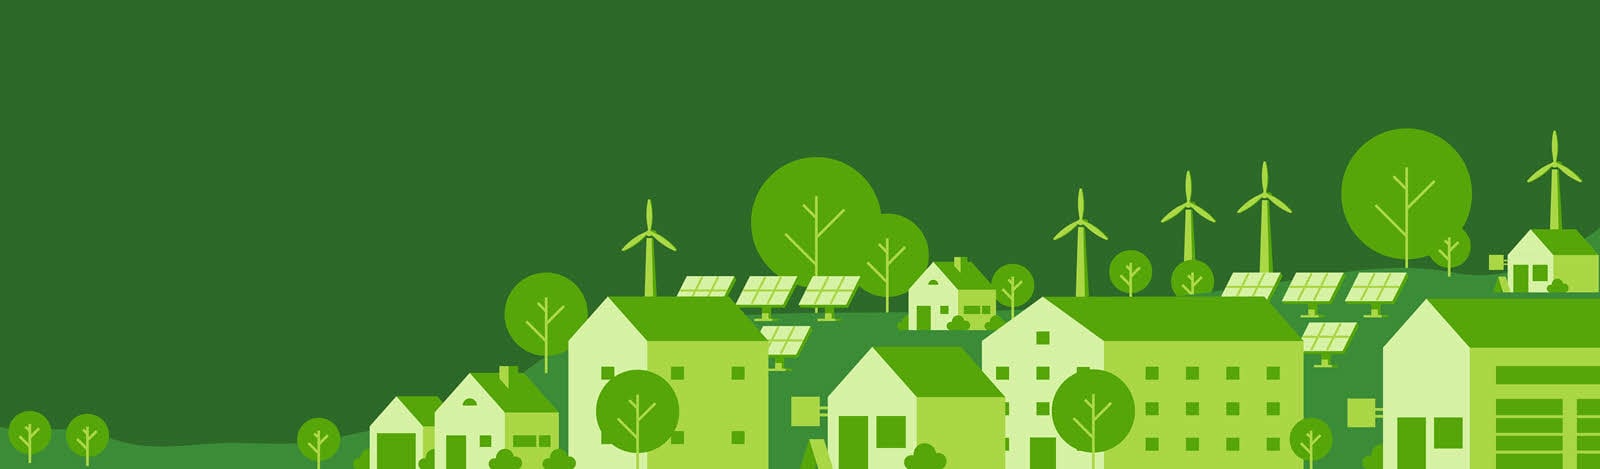 Illustration of an energy efficient town